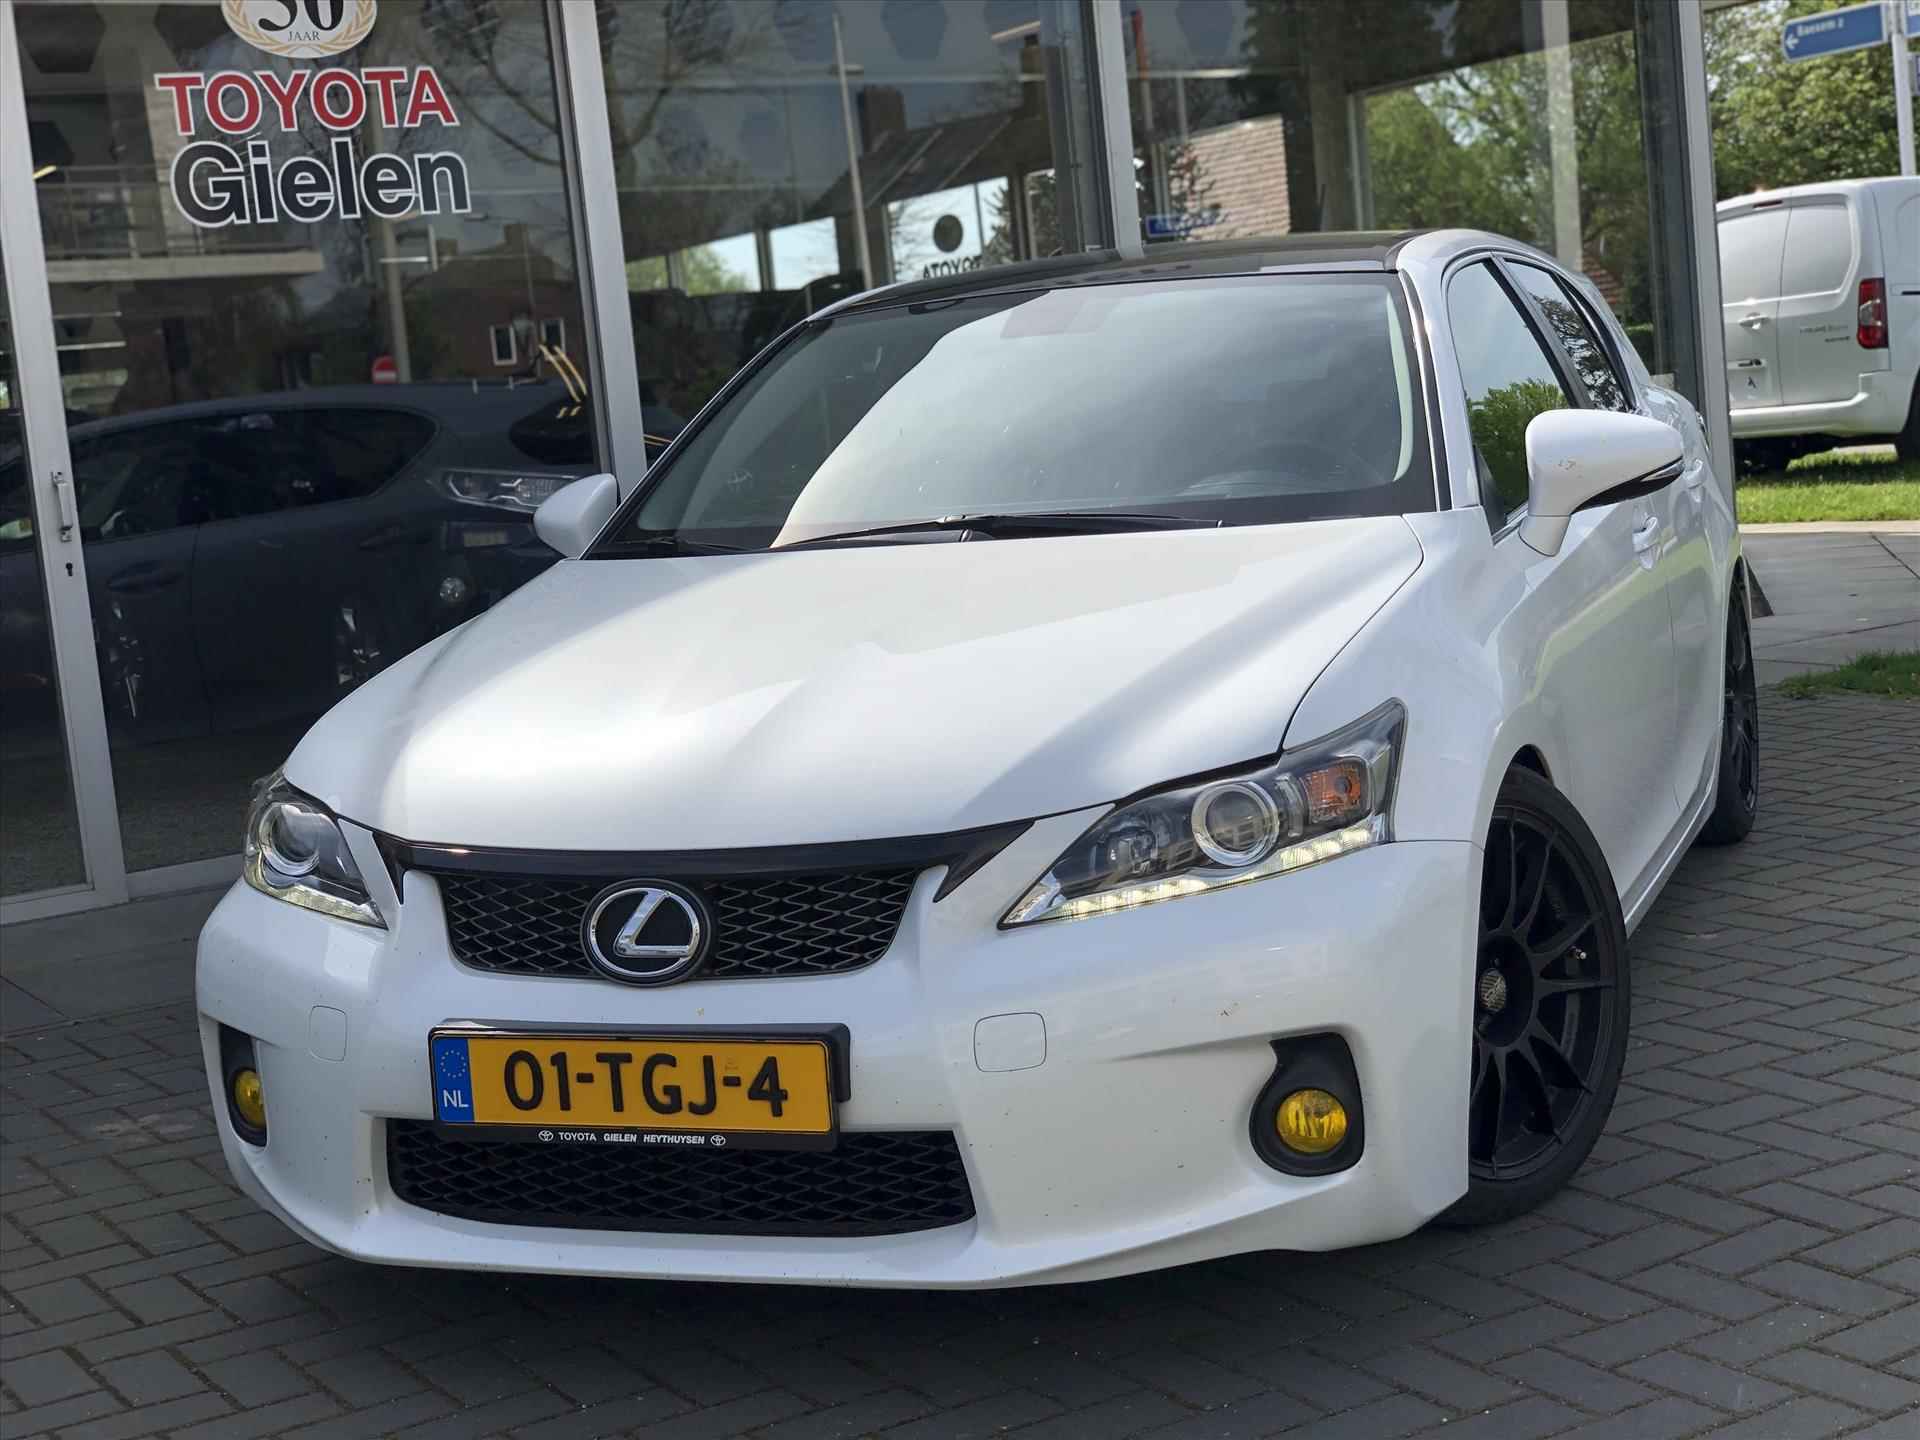 Lexus Ct 200h Business Line Pro F Sport Grill | Parkeercamera, Keyless, Cruise control, 18 inch, Privacy Glass, Zeer compleet! - 34/39